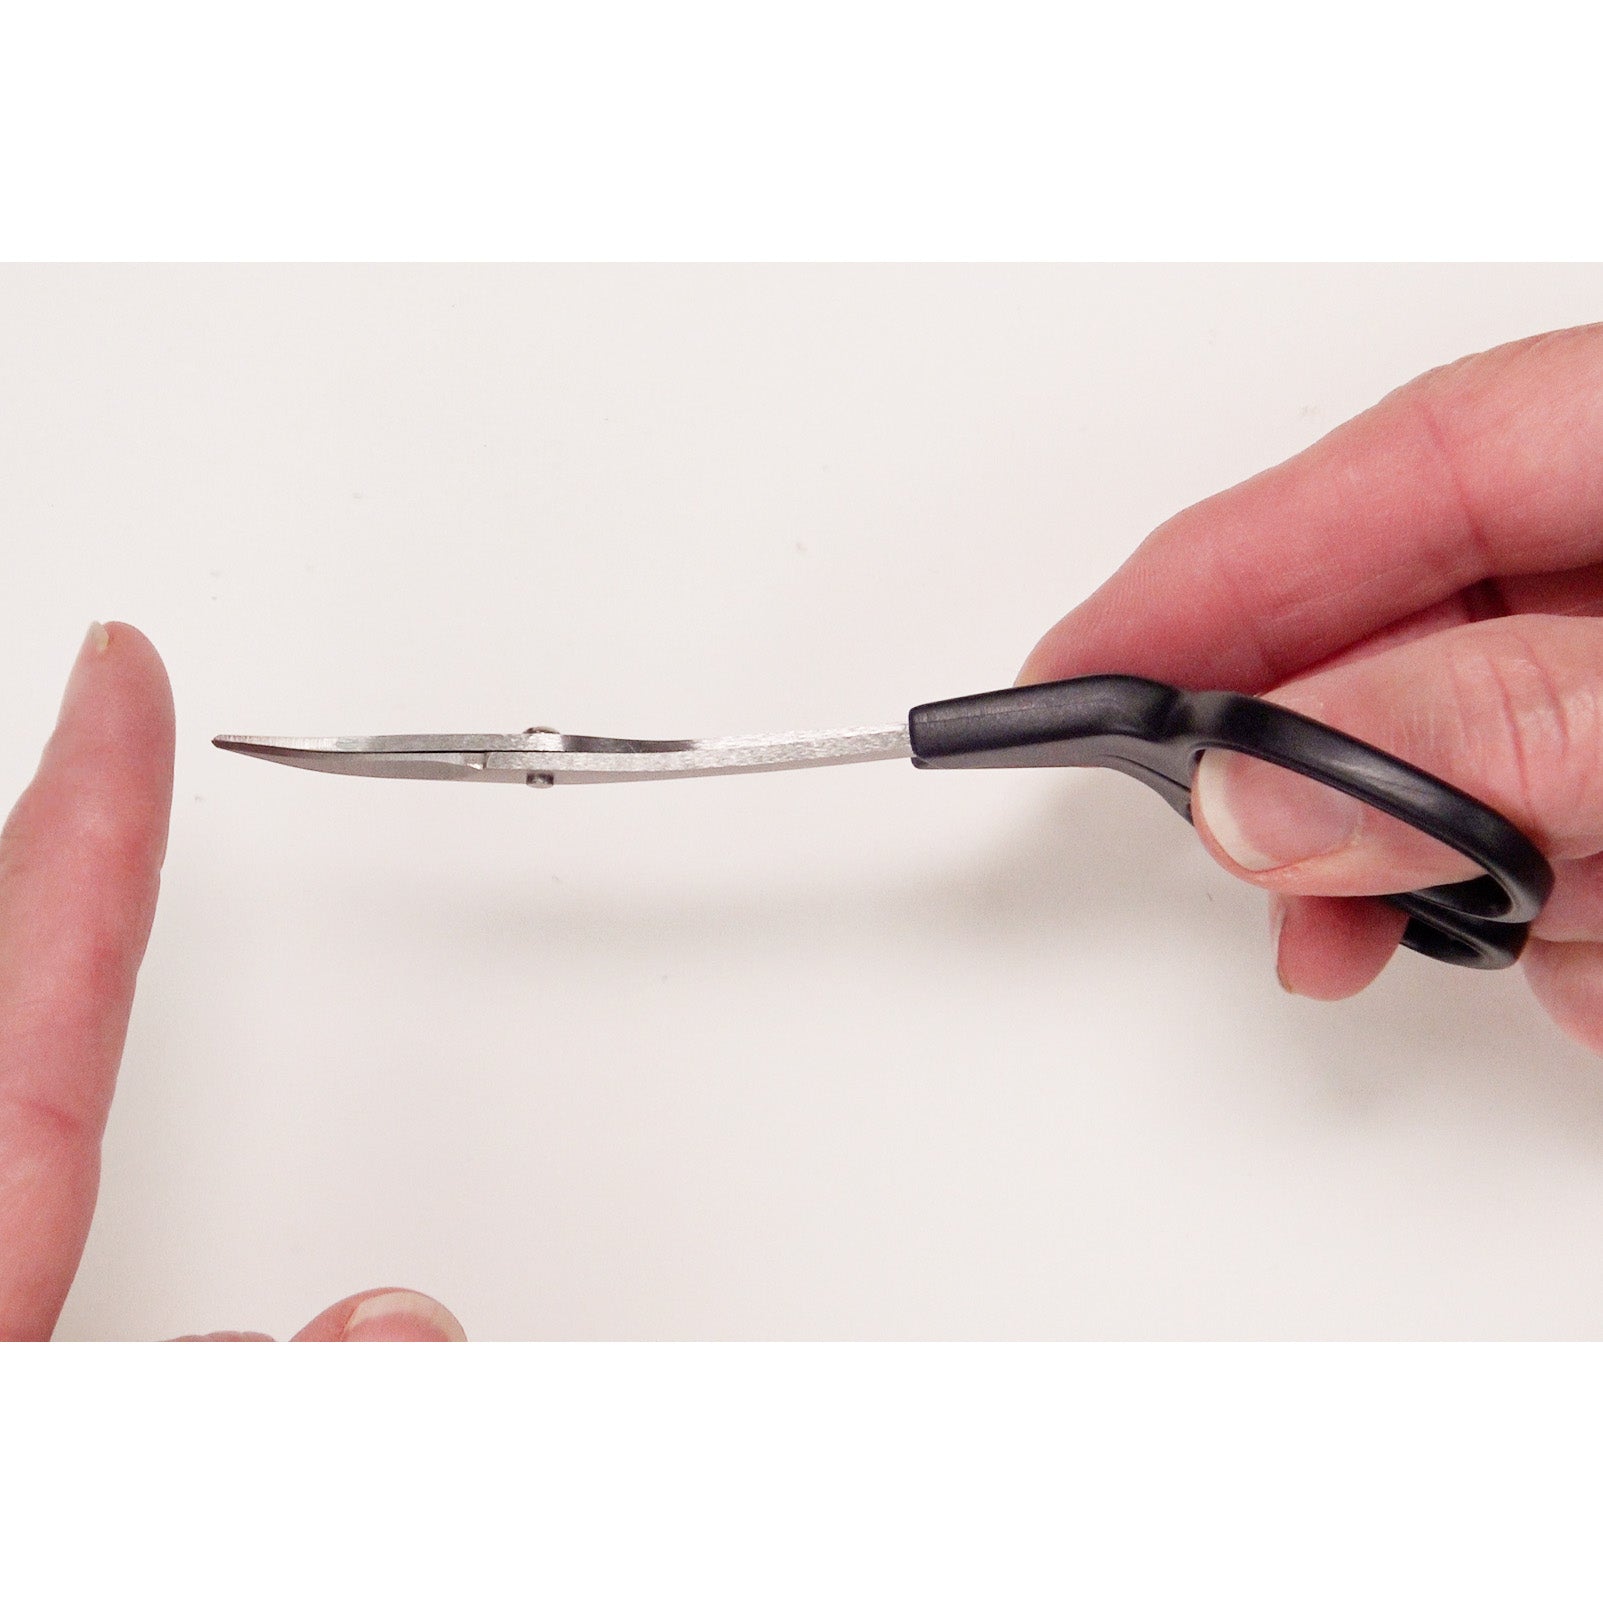 Double Curved Scissors by Kai